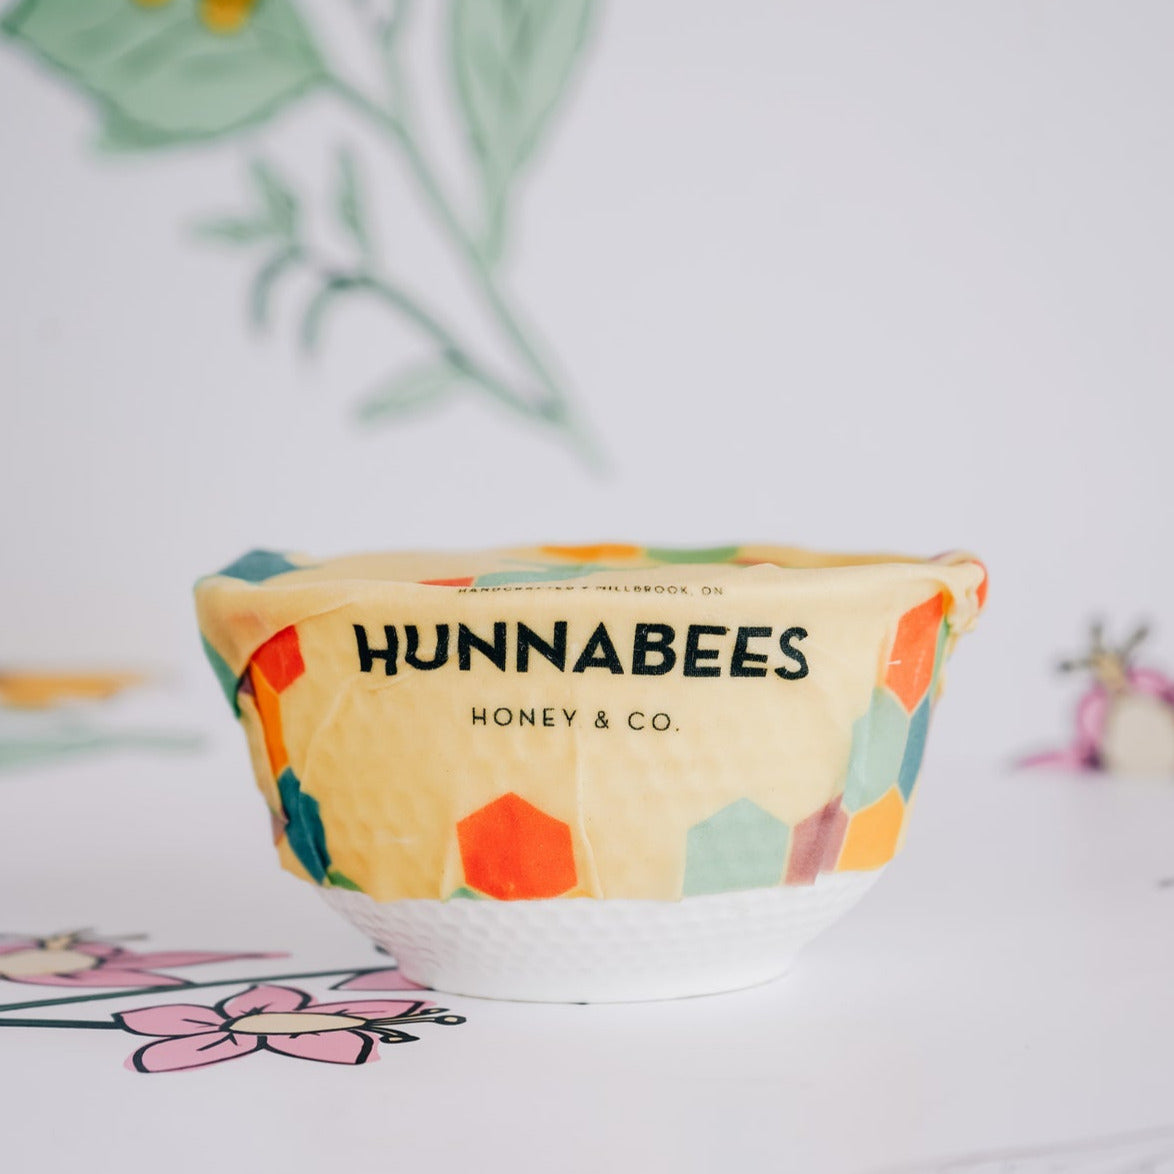 Bowl with a beeswax food wrap cover, with Hunnabees logo.